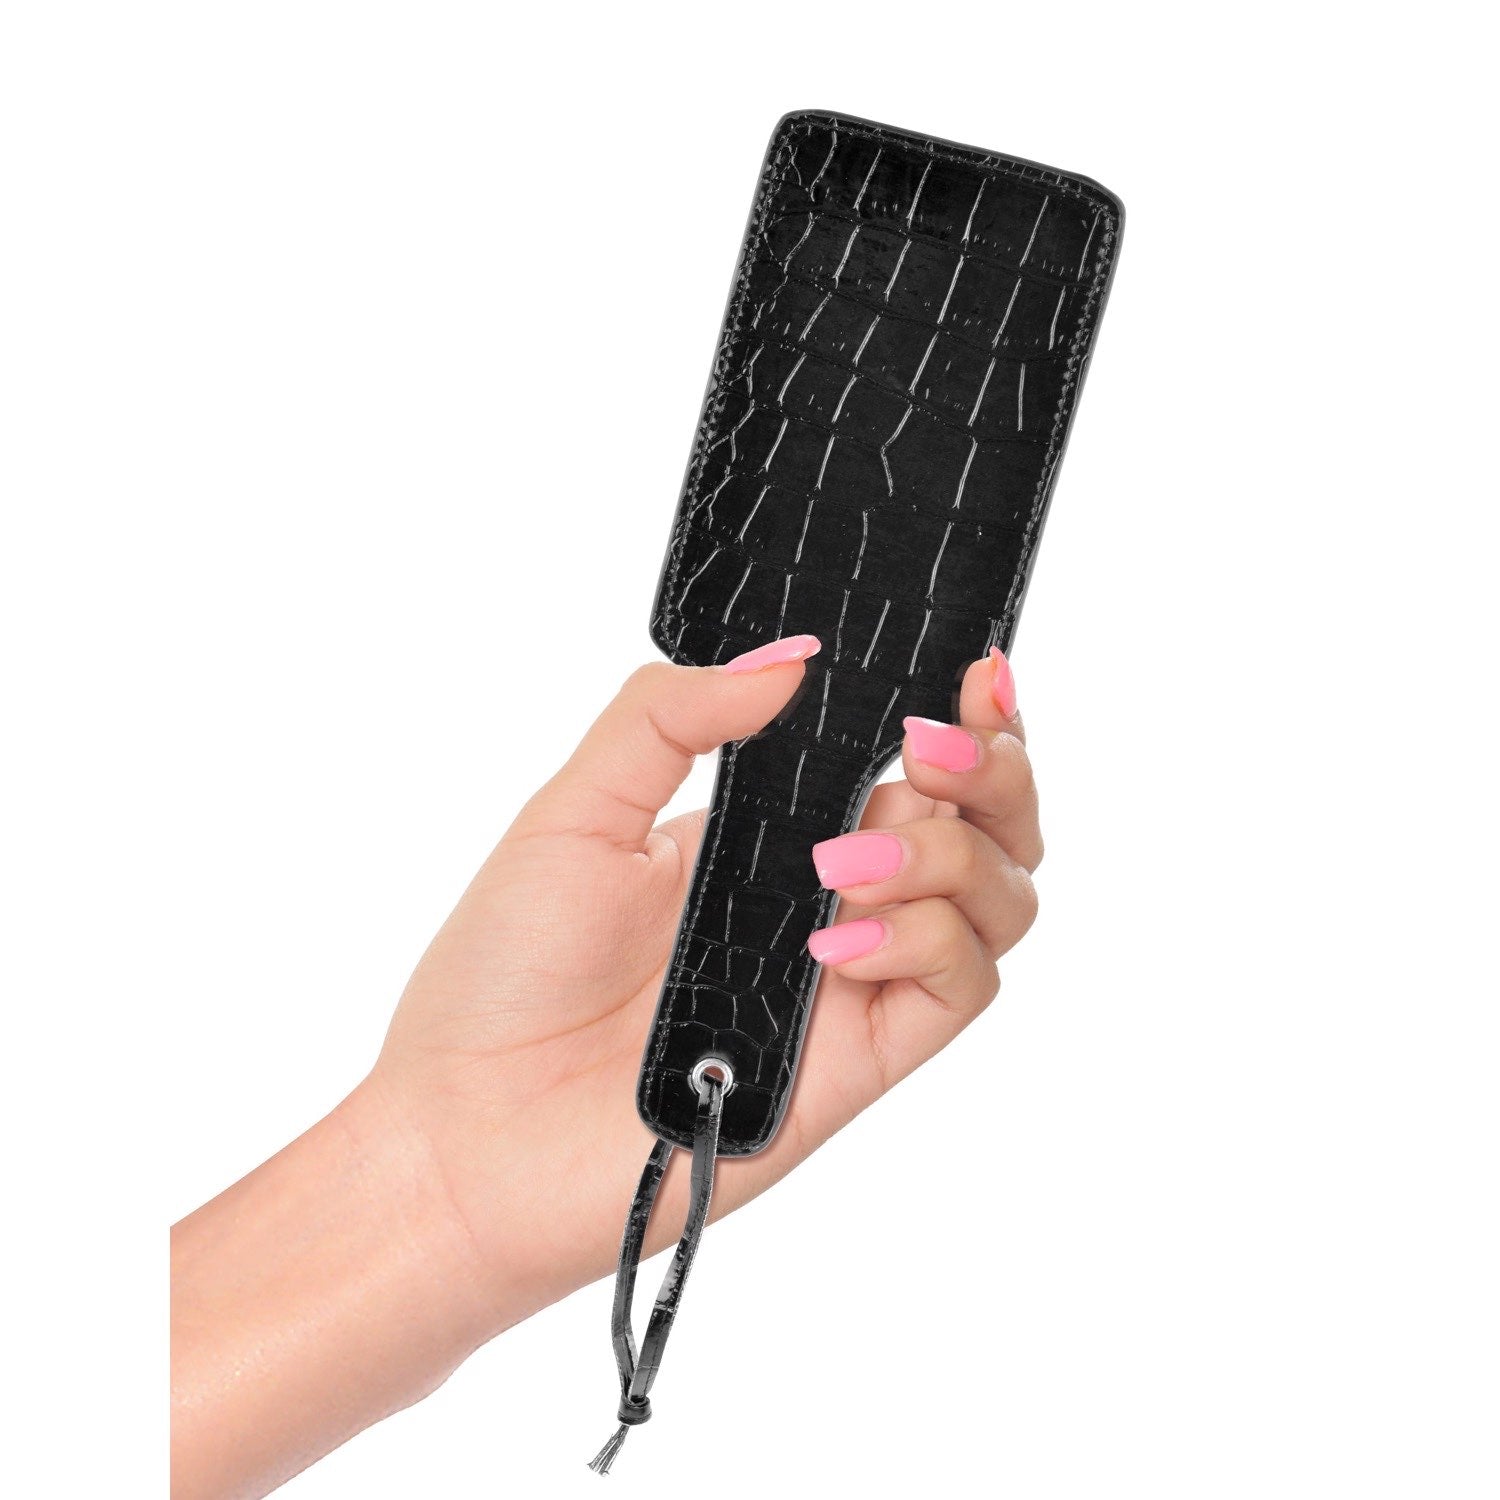 Fetish Fantasy Gold Pleasure Paddle - Black Paddle by Pipedream